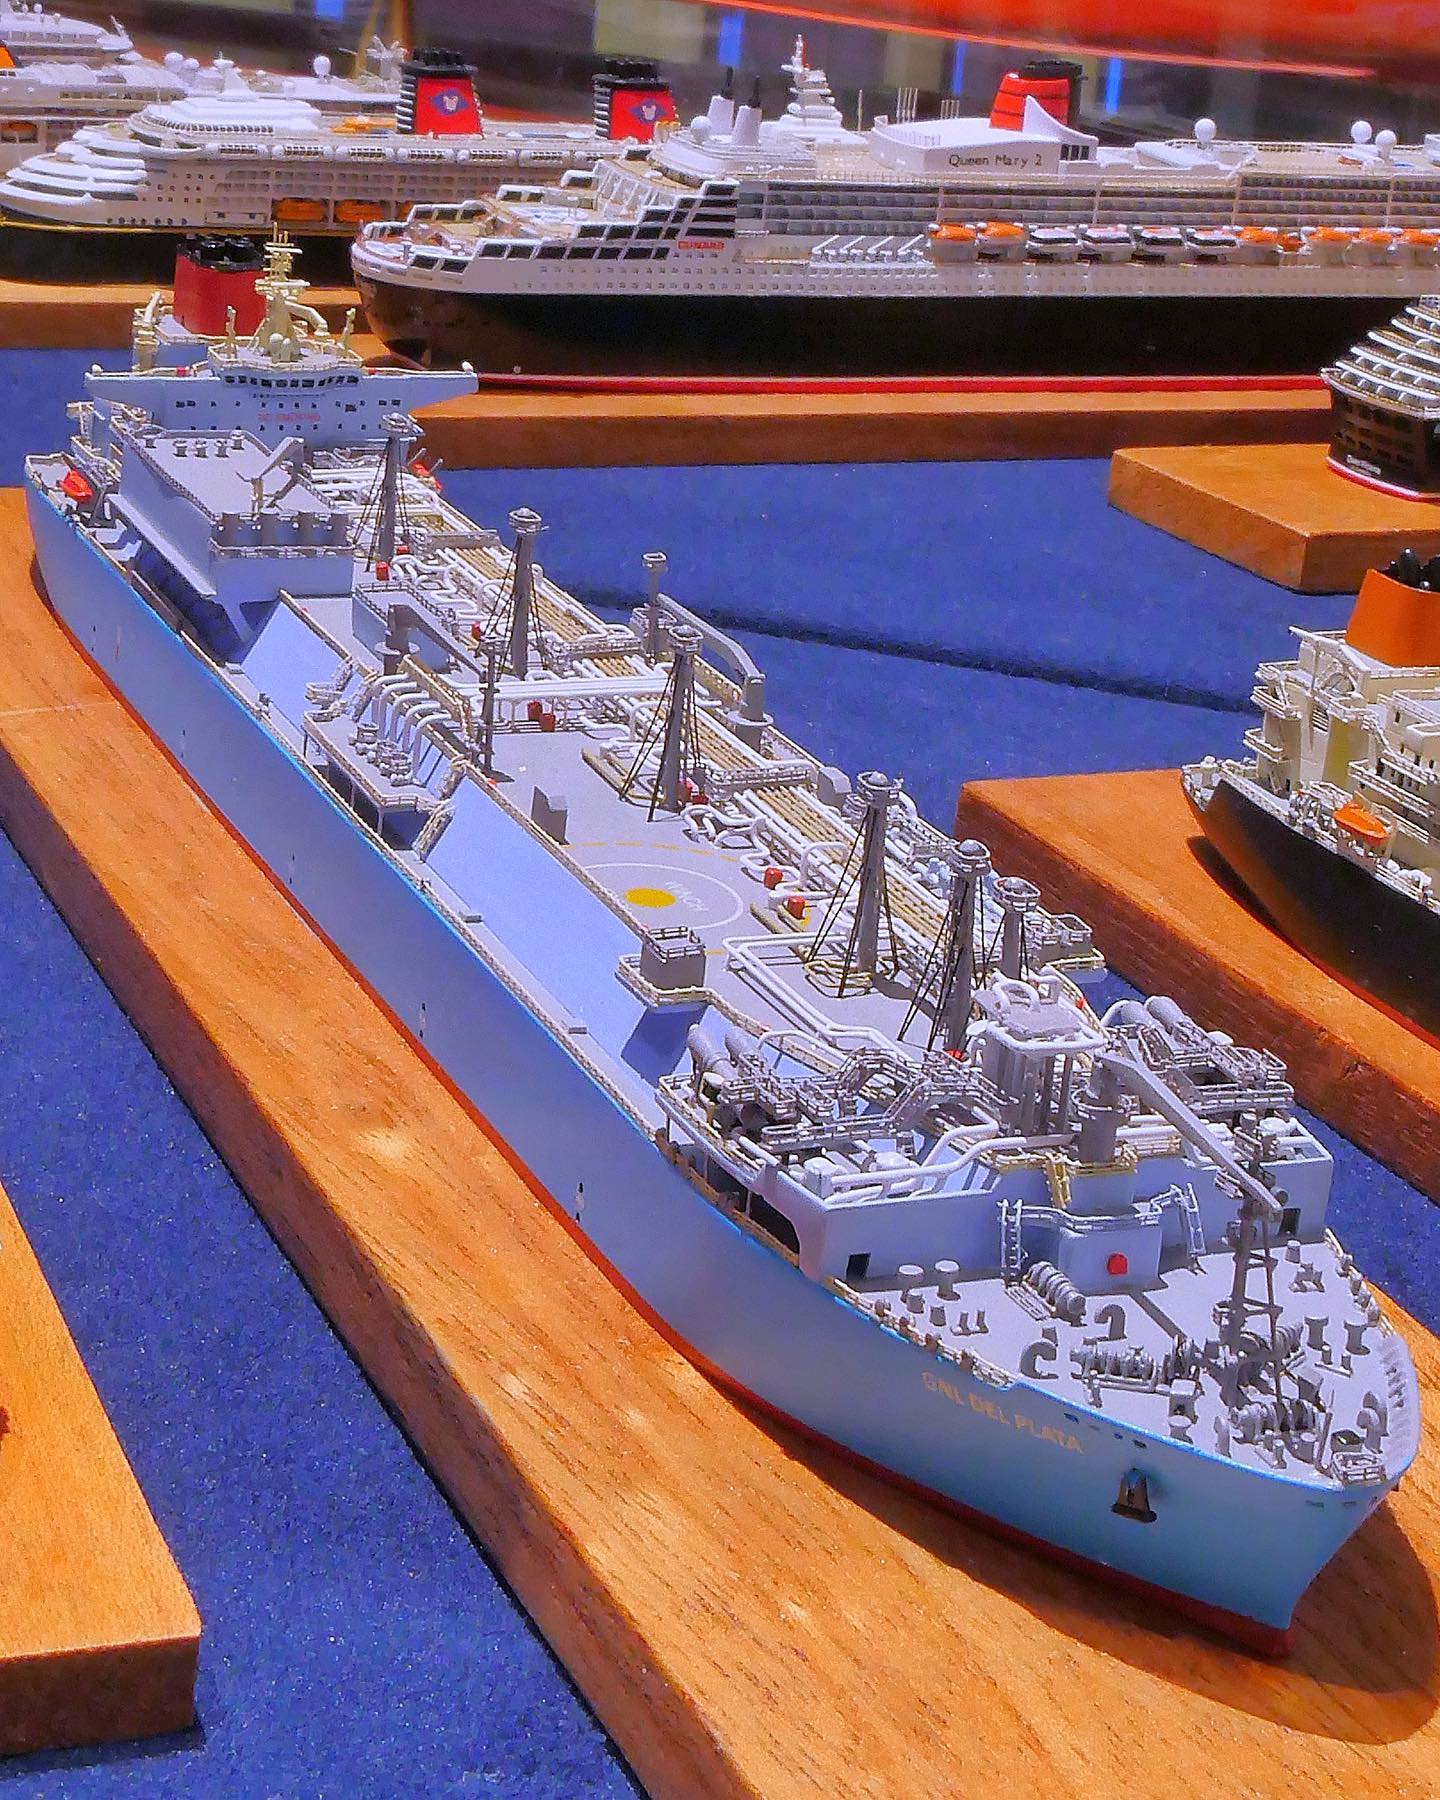 FSRU GNL del Plata. This 1:1250 scale miniature was masterfully crafted by the CSC workshop during the ship's construction and bears the planned name "GNL Del Plata". It stands on deck 9 of the museum.